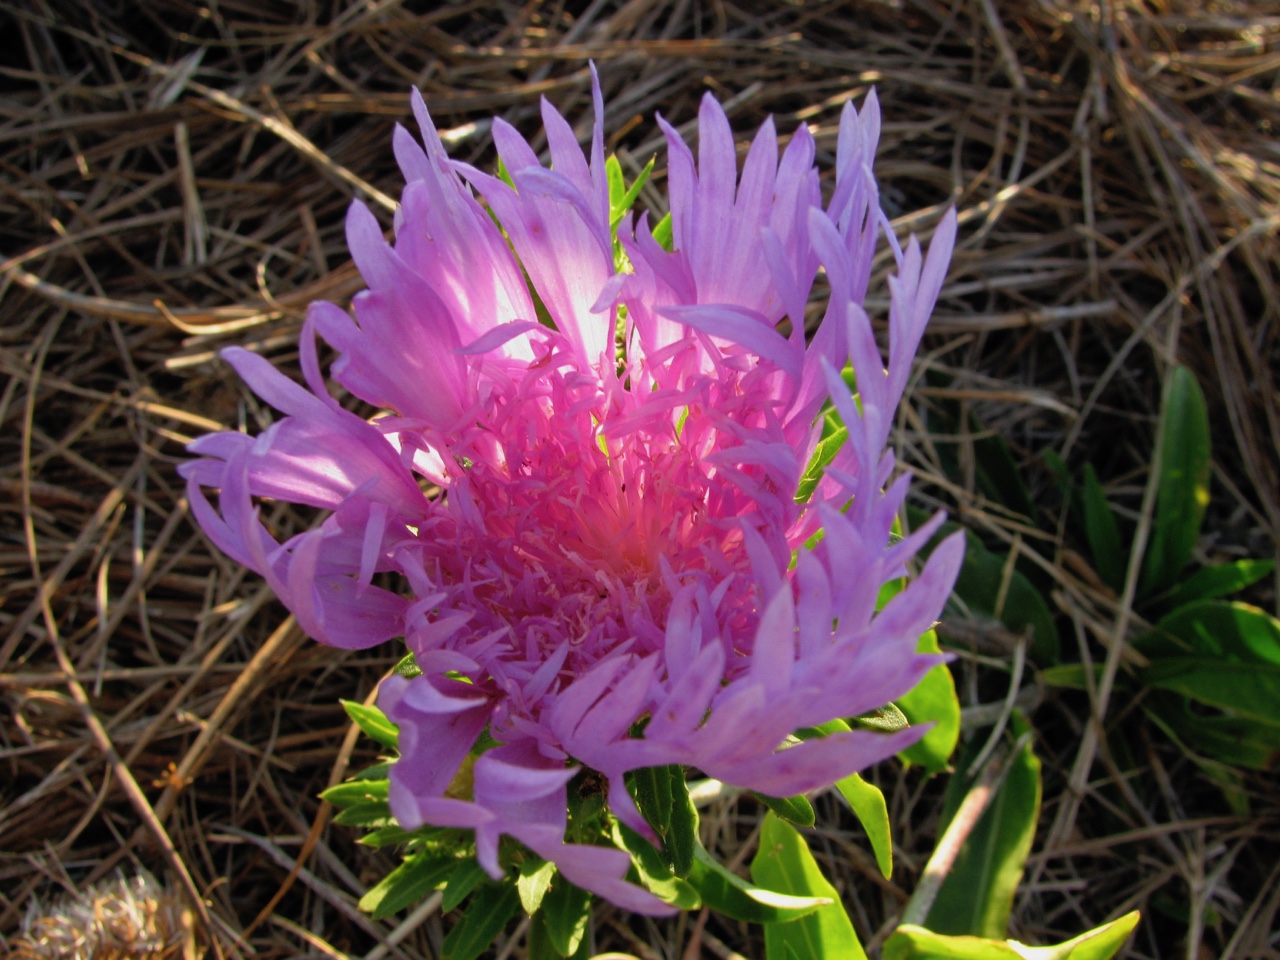 The Scientific Name is Stokesia laevis. You will likely hear them called Stokes Aster, Stokesia, Blue Stokesia, Stokes's Aster, Cornflower Aster. This picture shows the The colors are spectacular when backlit of Stokesia laevis